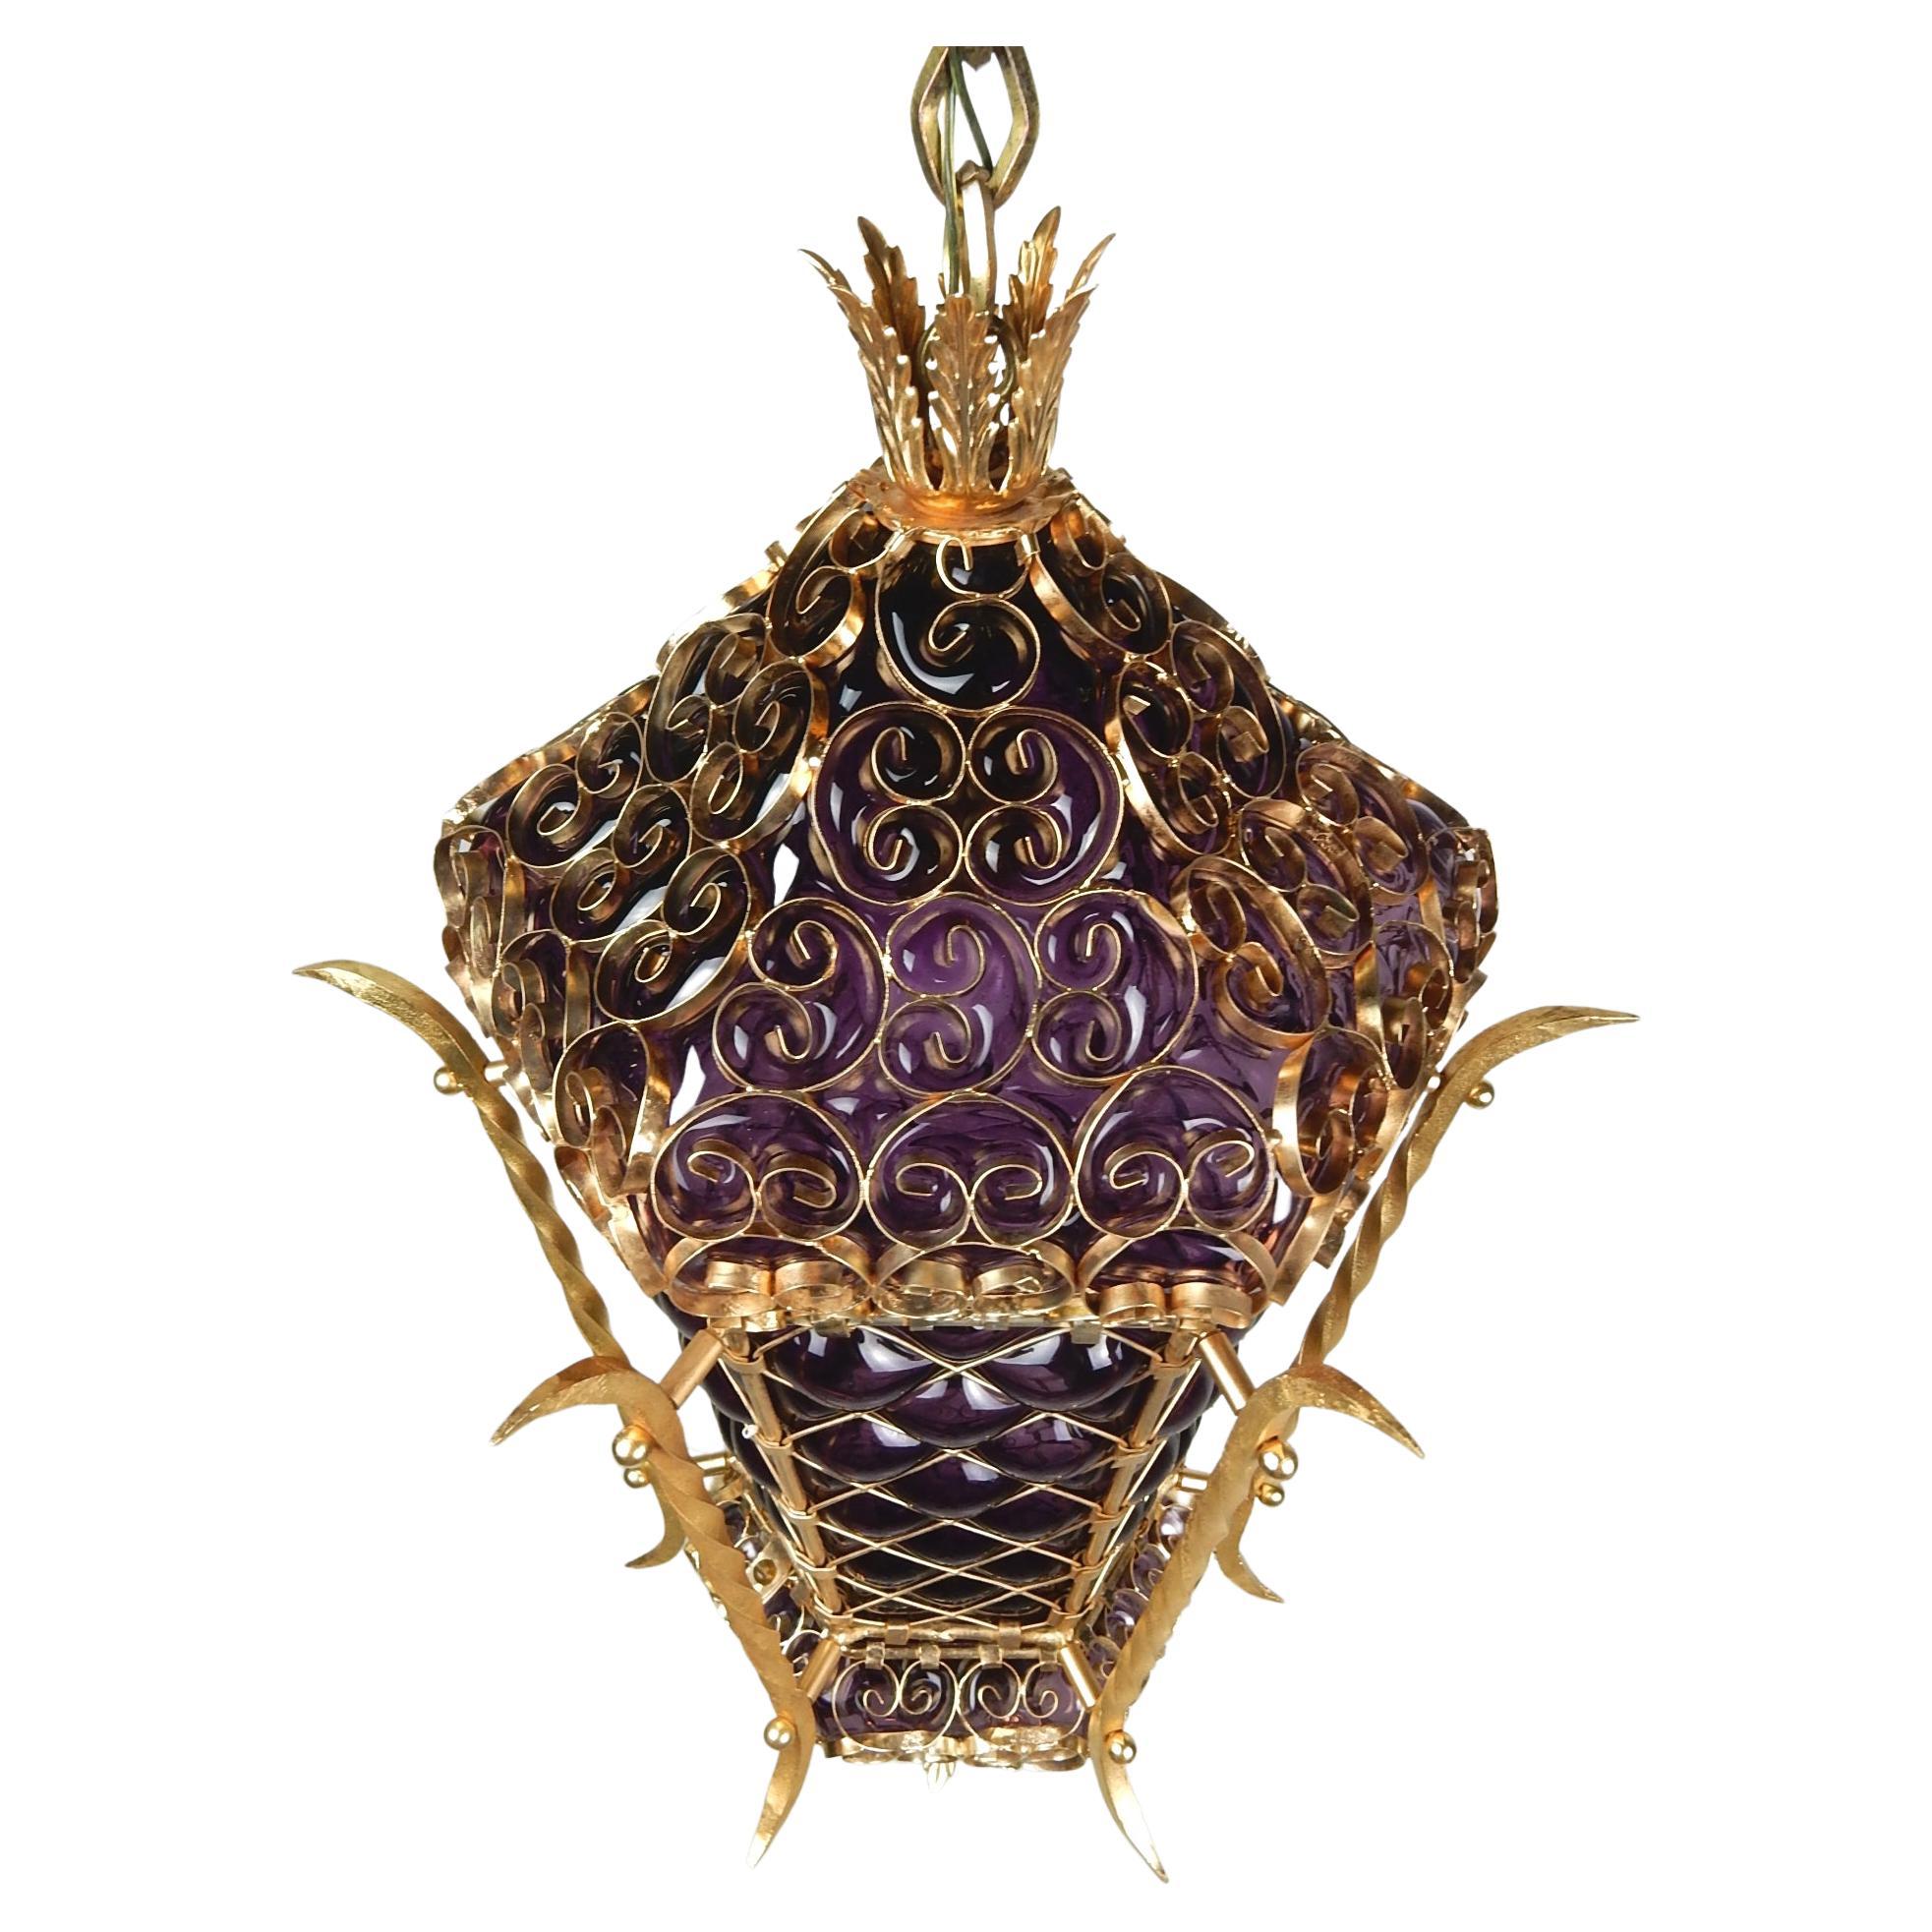 Gorgeous Bohemian caged purple glass in a gleaming gold metal swag pendant lamp, circa 1960s.
Takes a single standard light bulb in the 24 X 16 inch pendant.
Swags on a 15 foot custom chain or could be made into a ceiling pendant with ease.